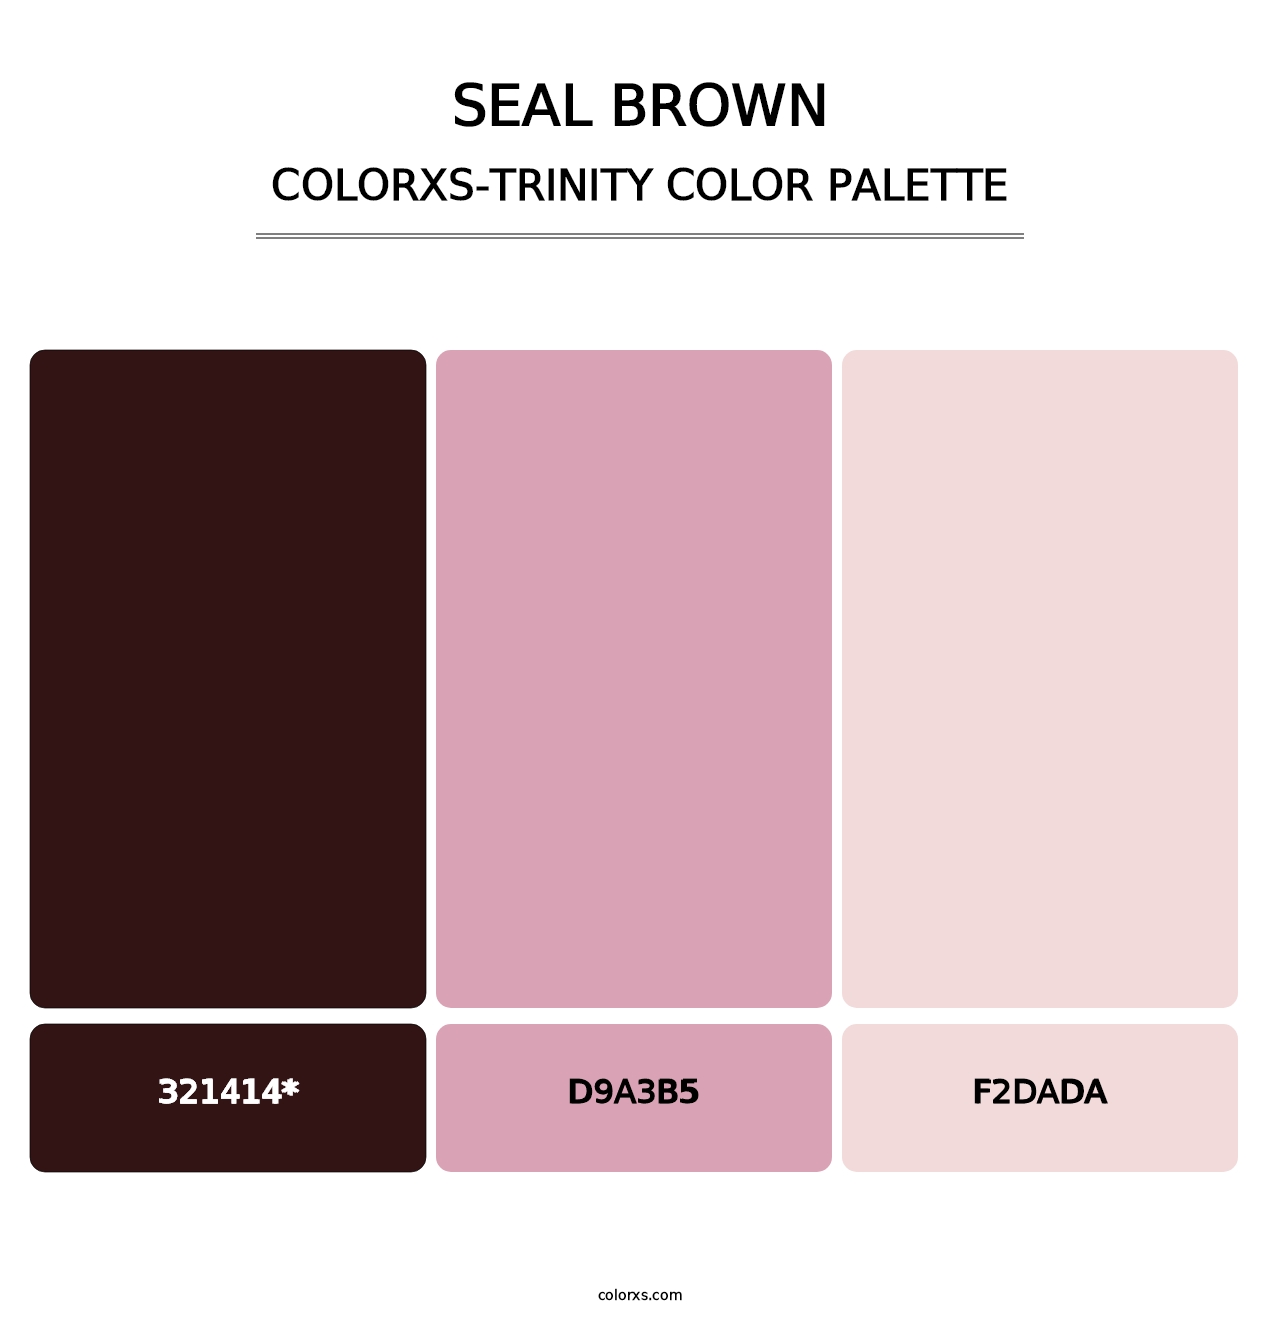 Seal brown - Colorxs Trinity Palette